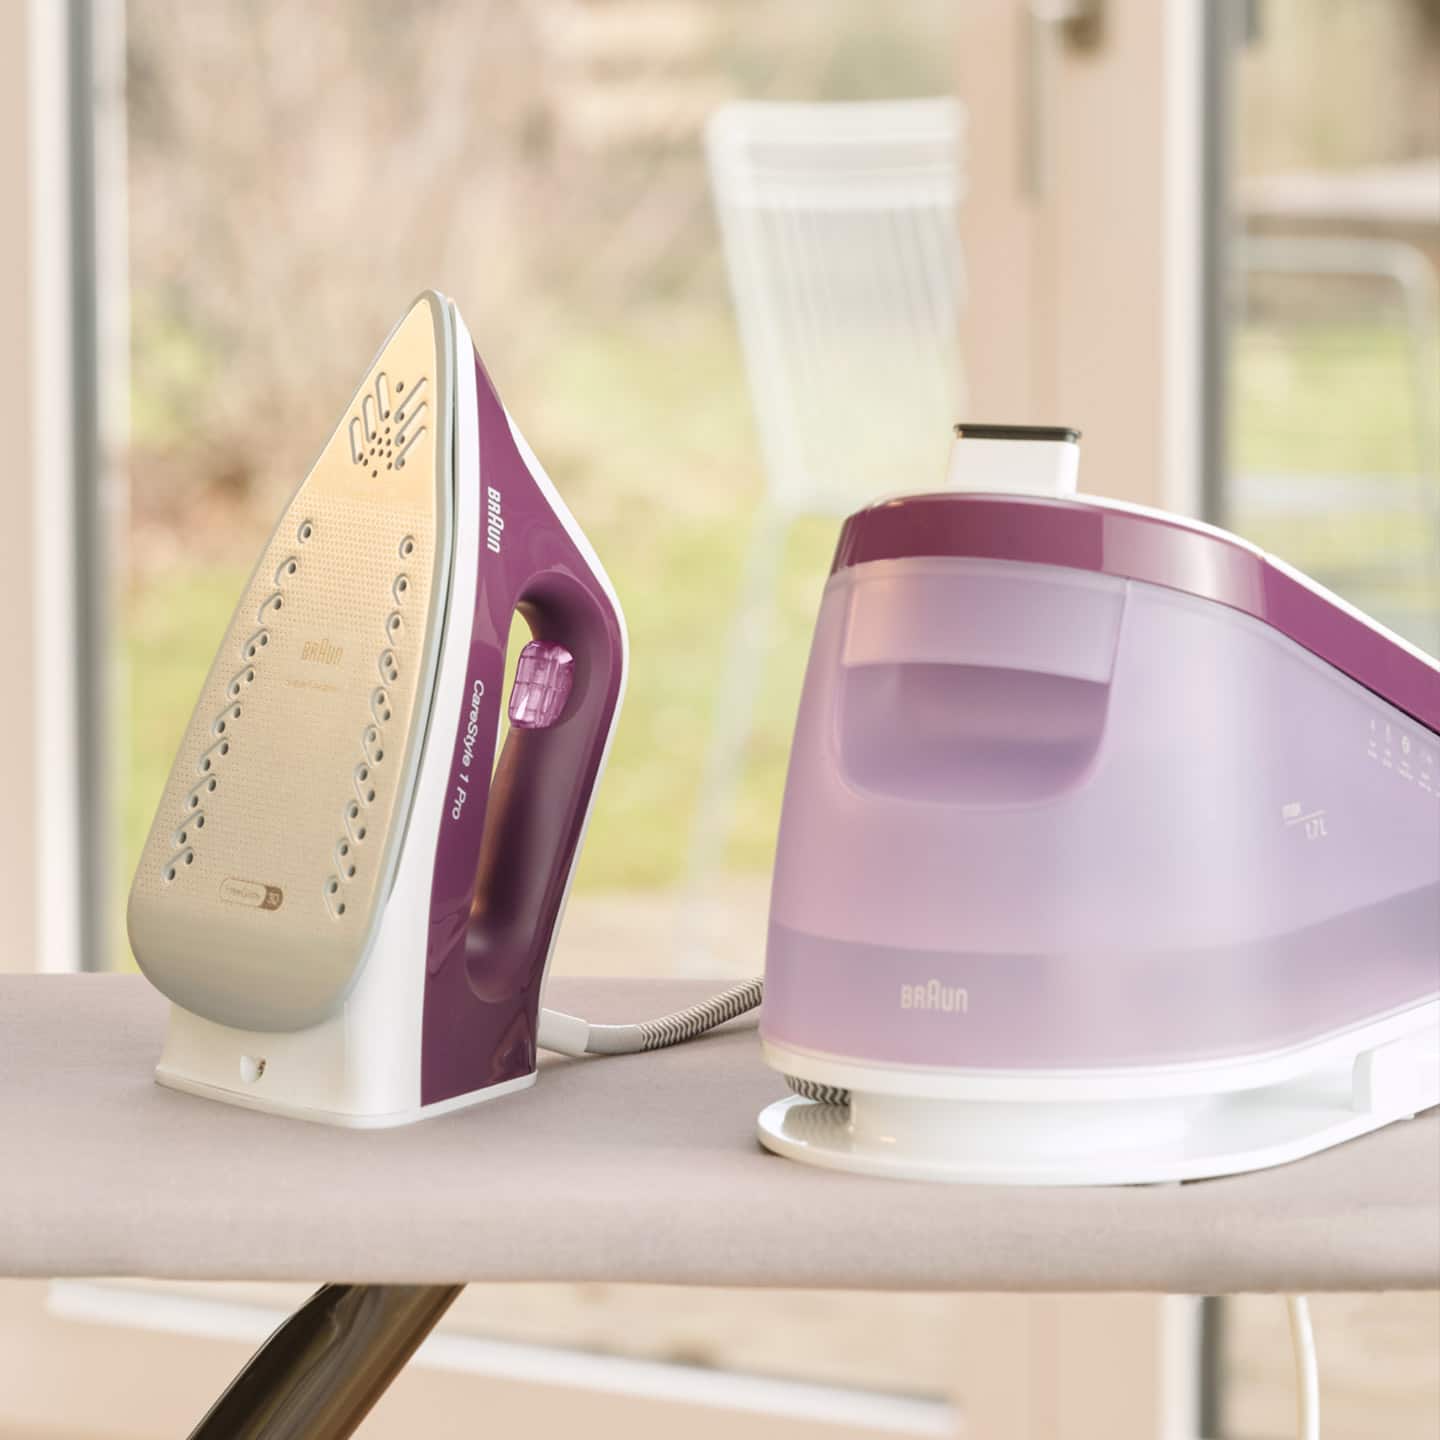 A purple iron and a white cleaning supply placed on a table